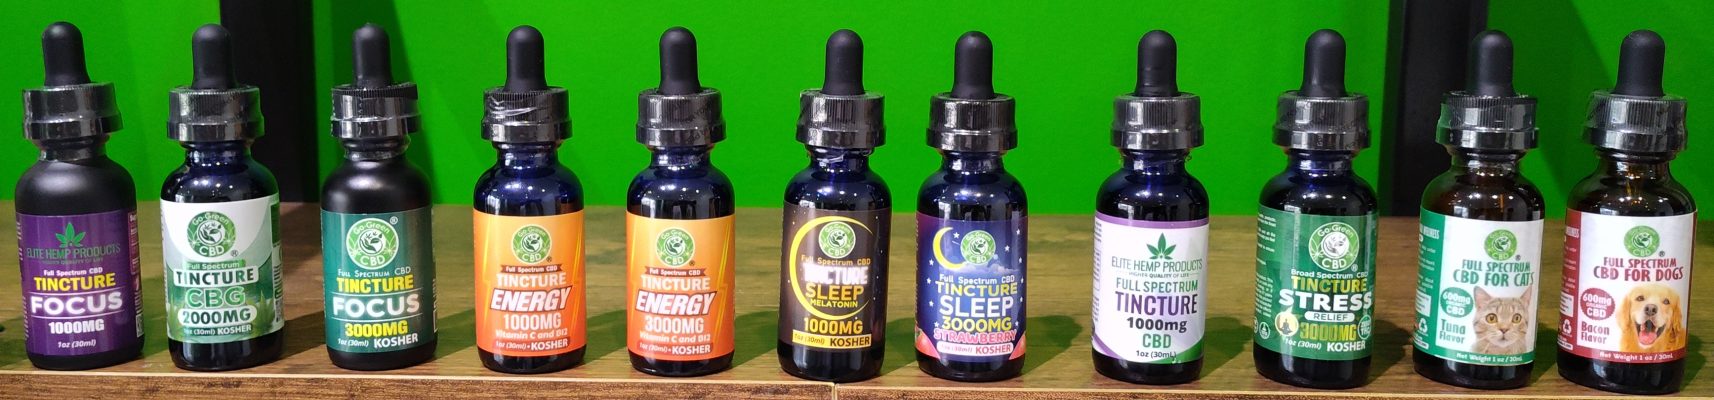 All tinctures